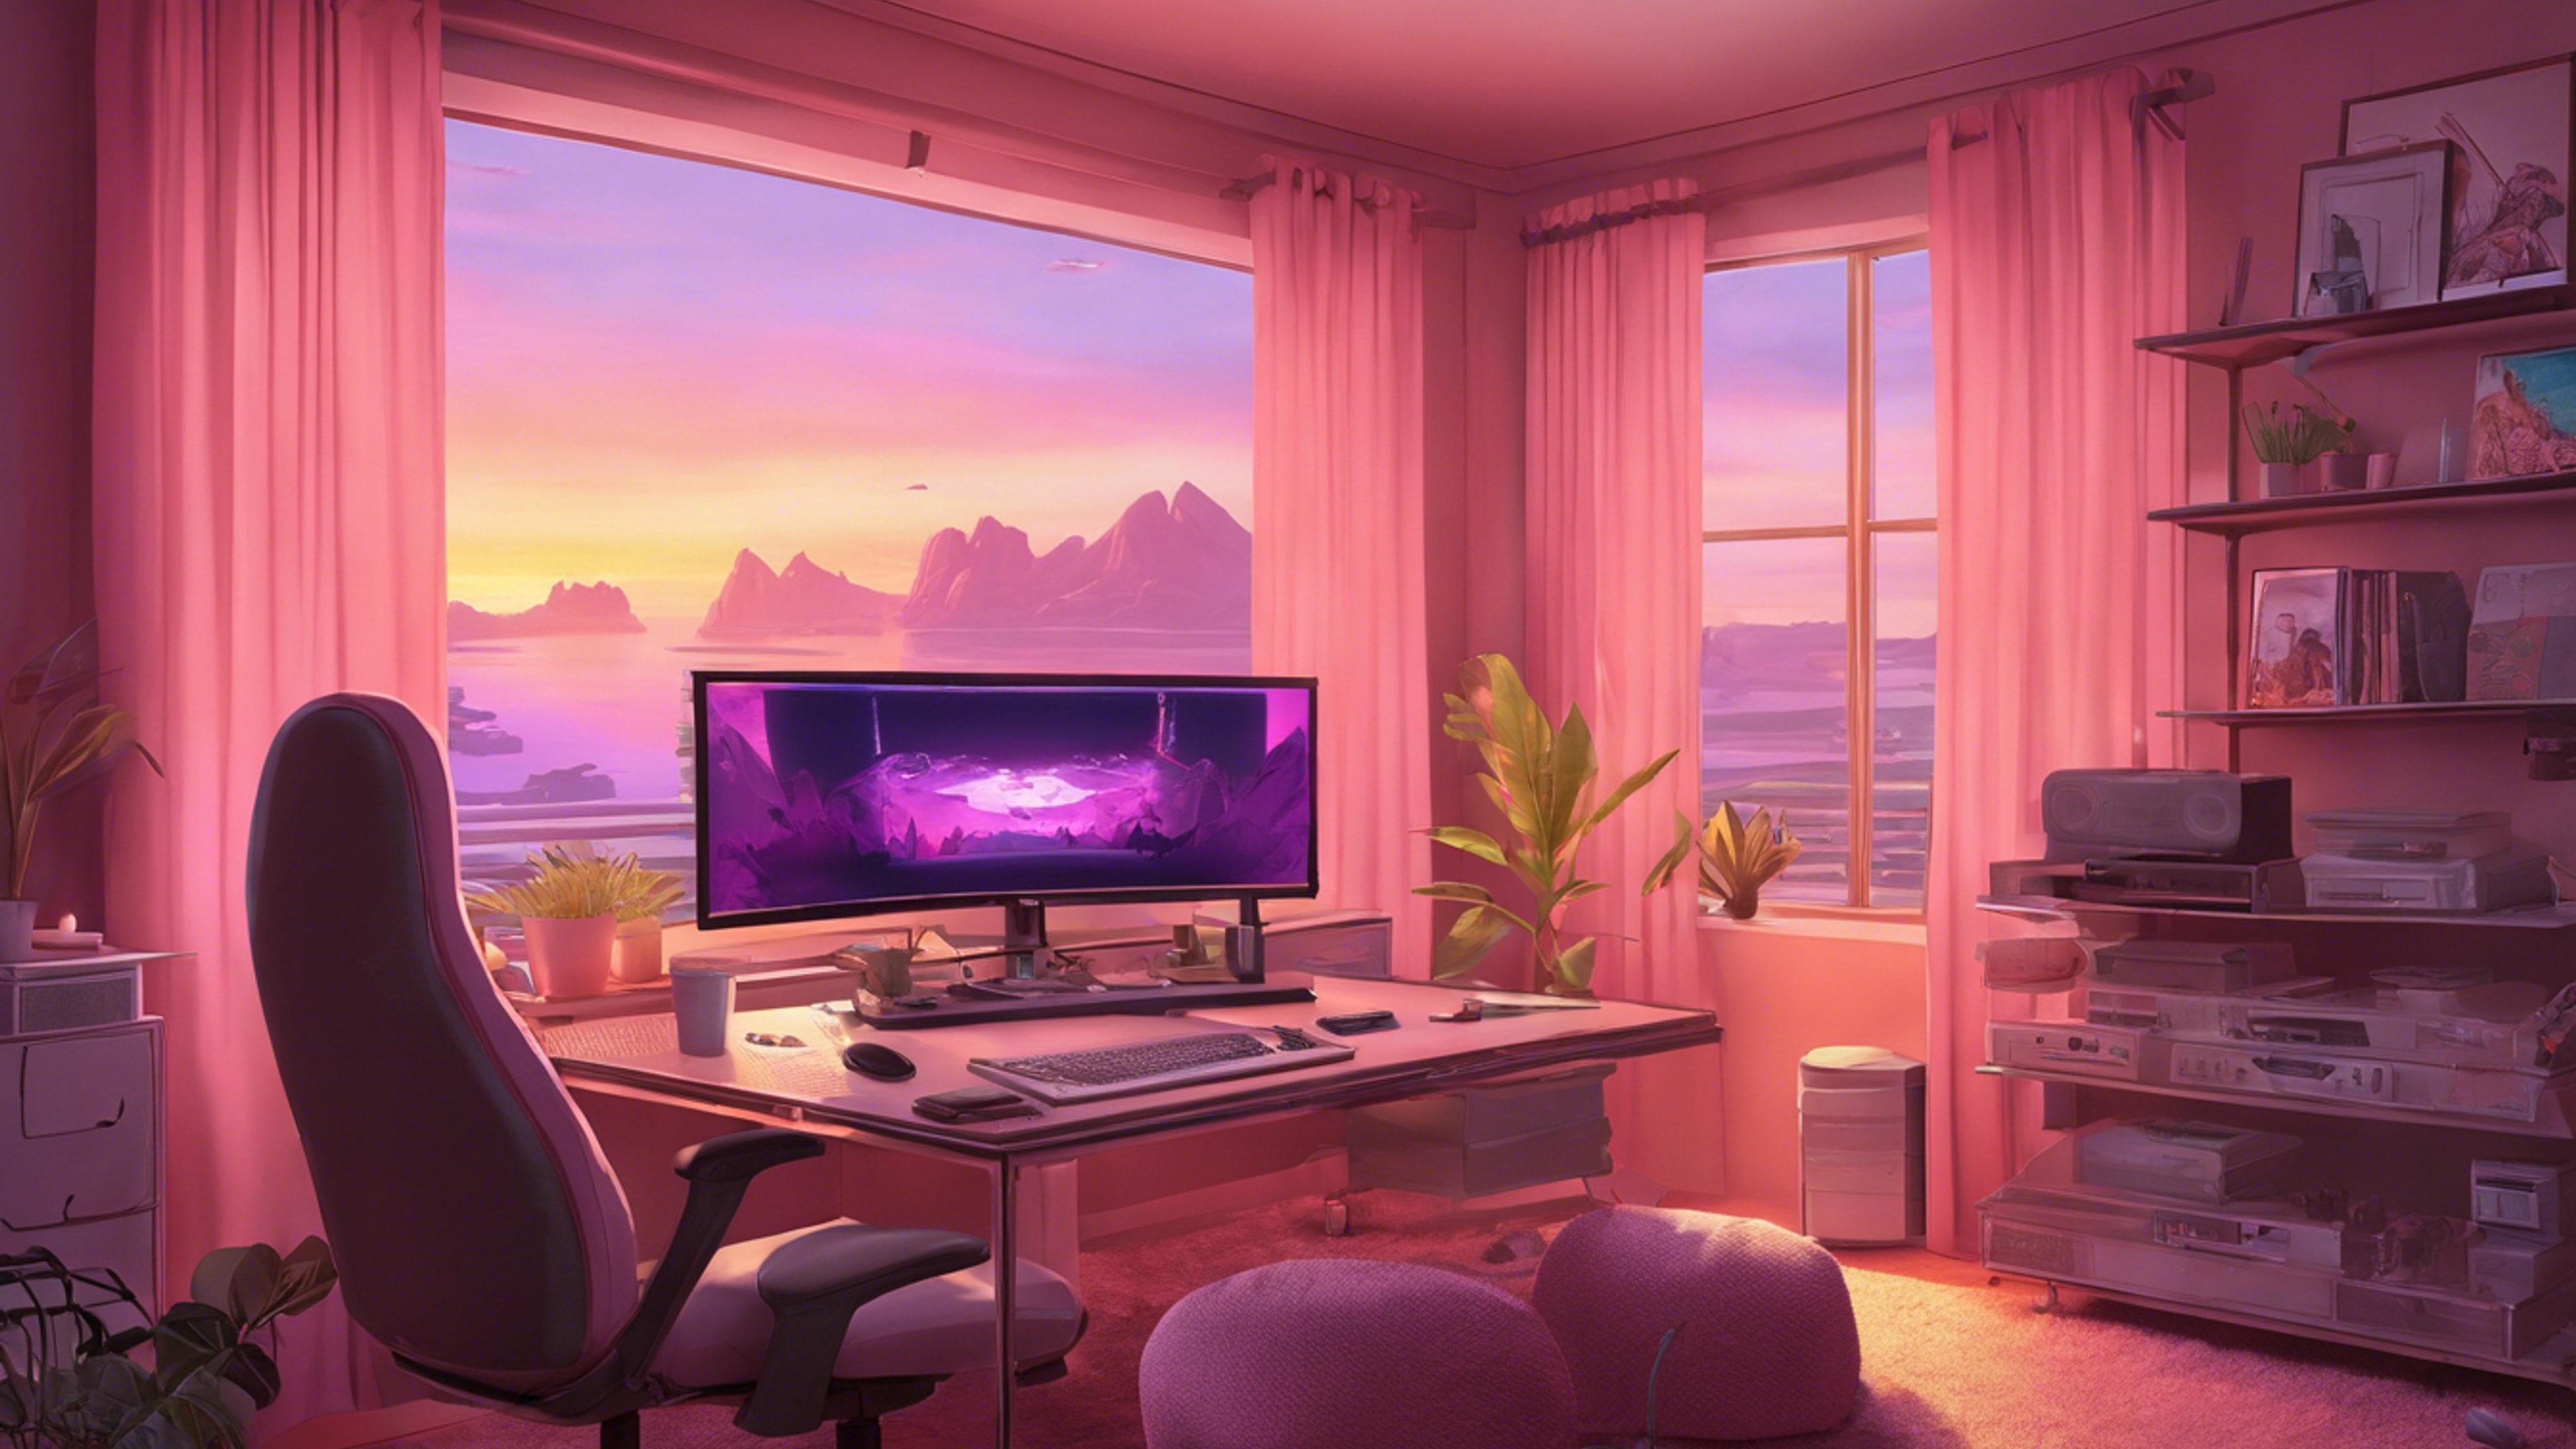 A beautiful shot of a gaming room at dusk with pastel pink curtains slightly drawn, allowing soft sunset hues to blend with the gaming setup's ambient light. Hintergrund[98f2c4ff56214265aa5c]